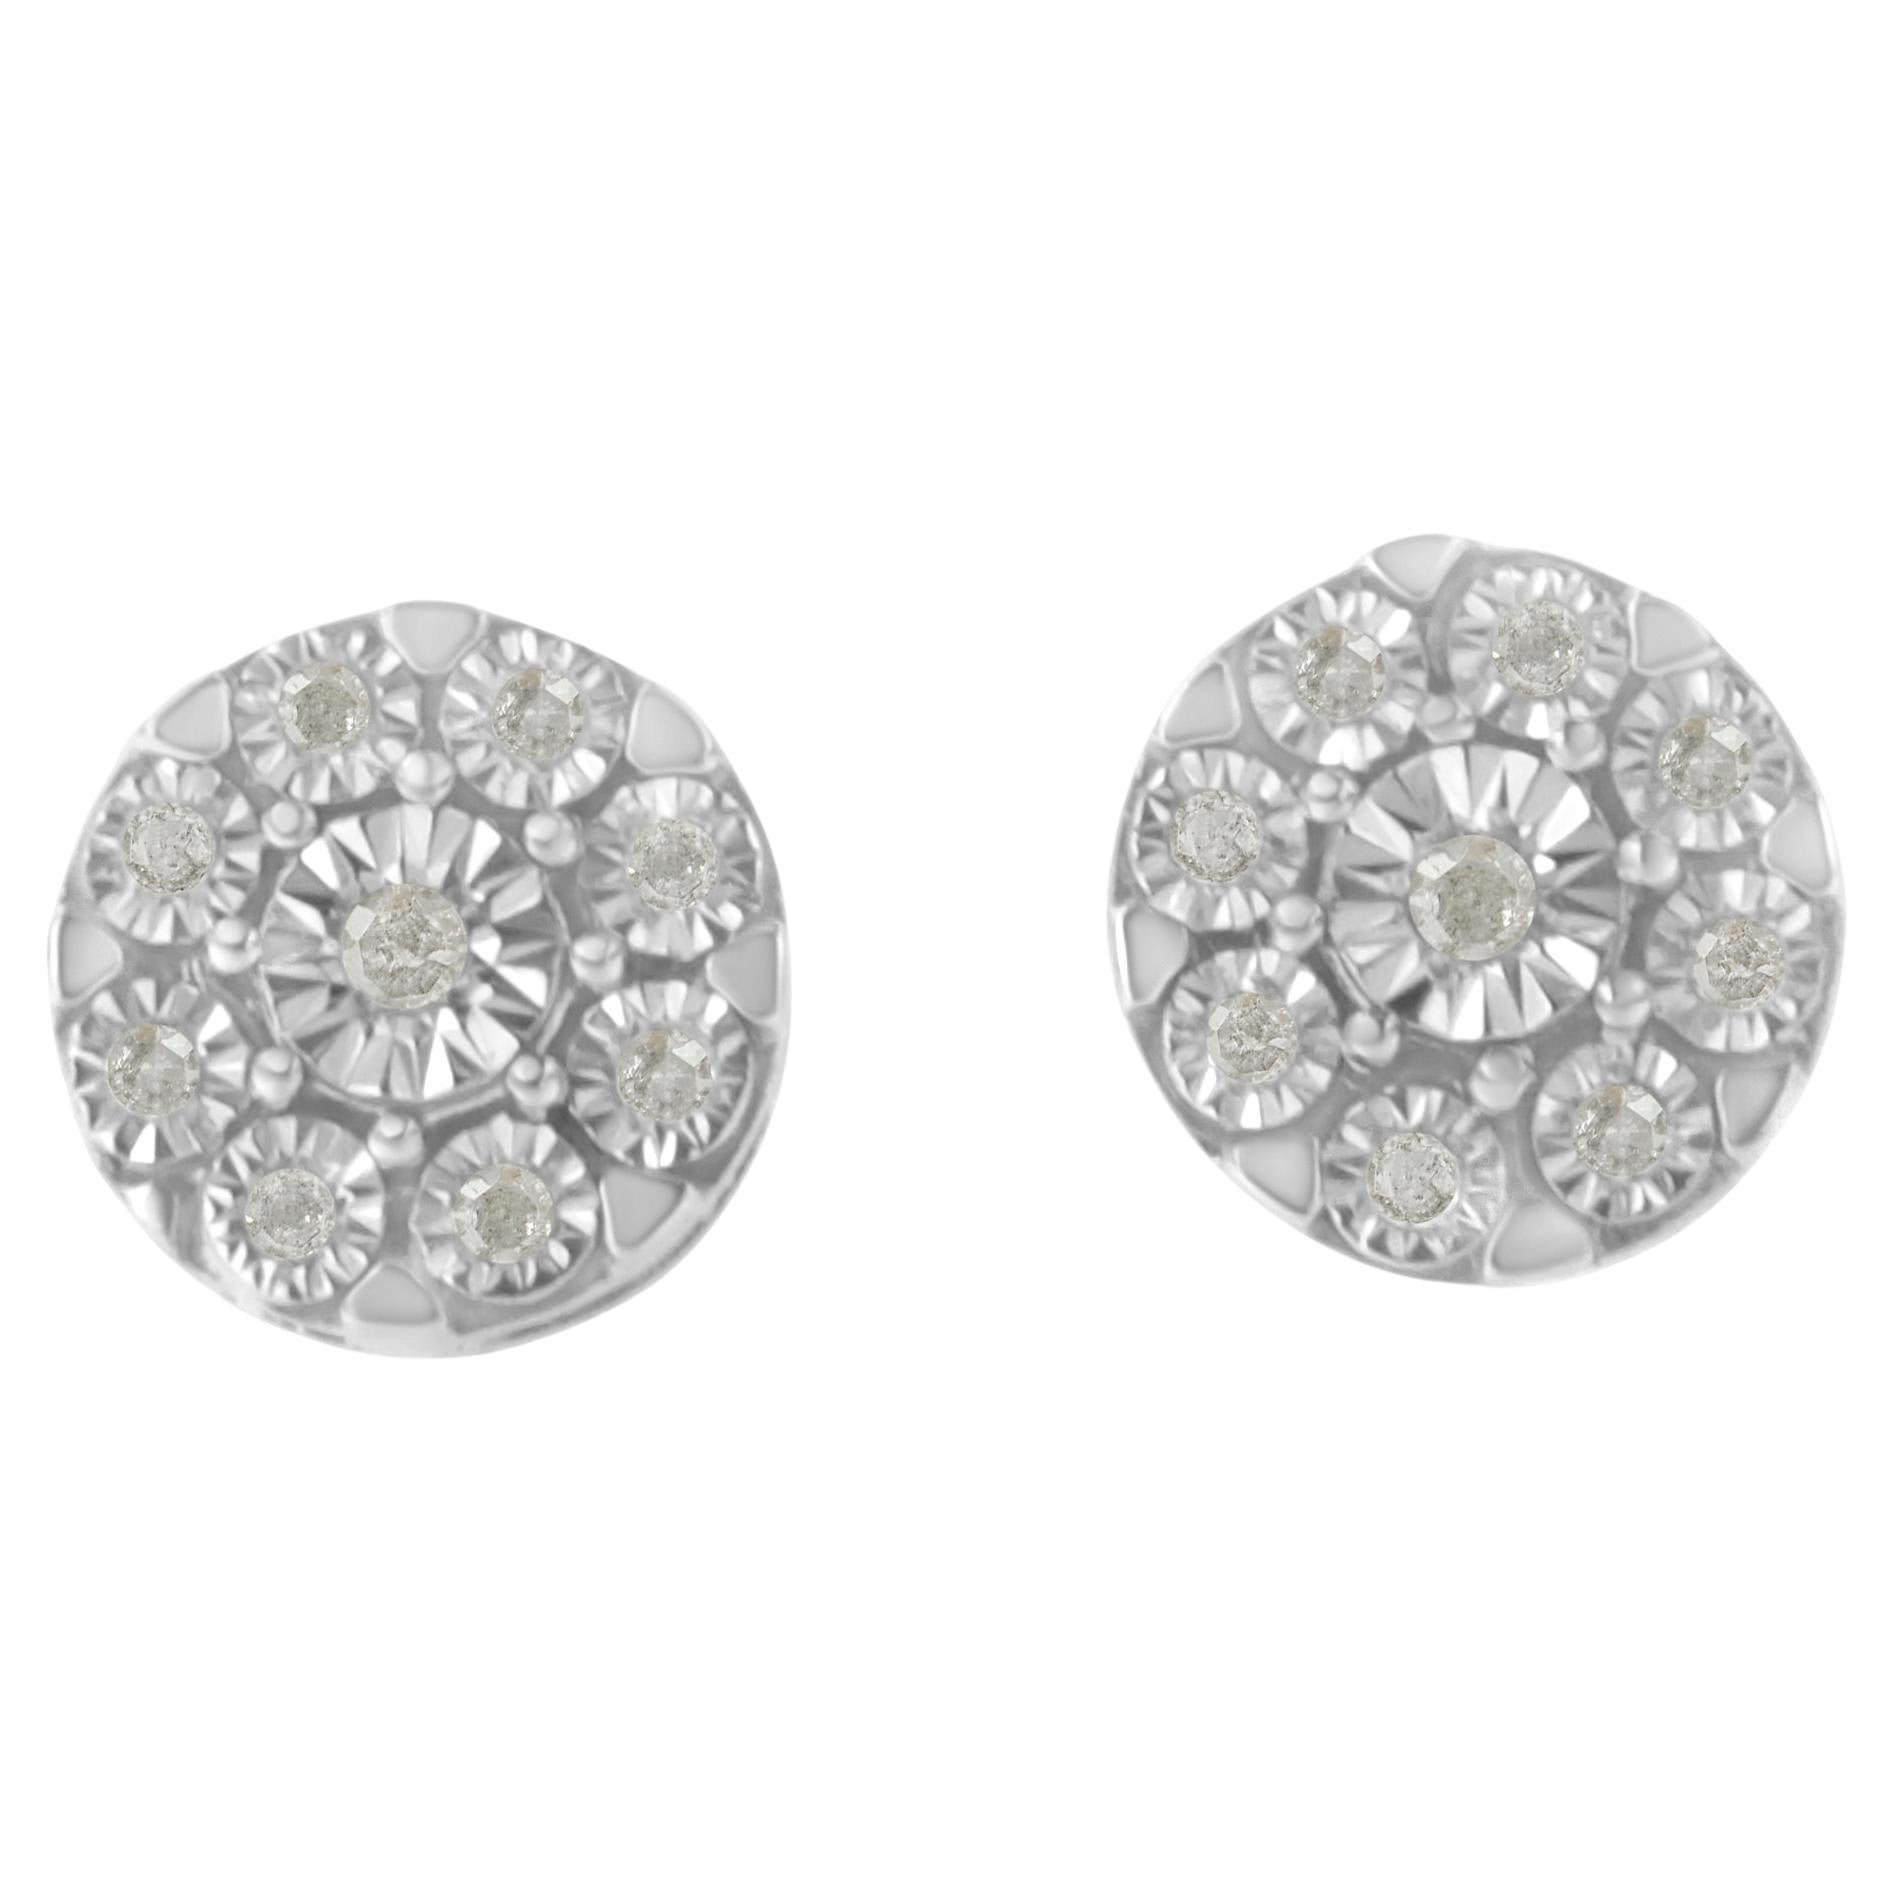 .925 Sterling Silver 1/5 Carat Miracle Plate Set Round Diamond Halo Stud Earring